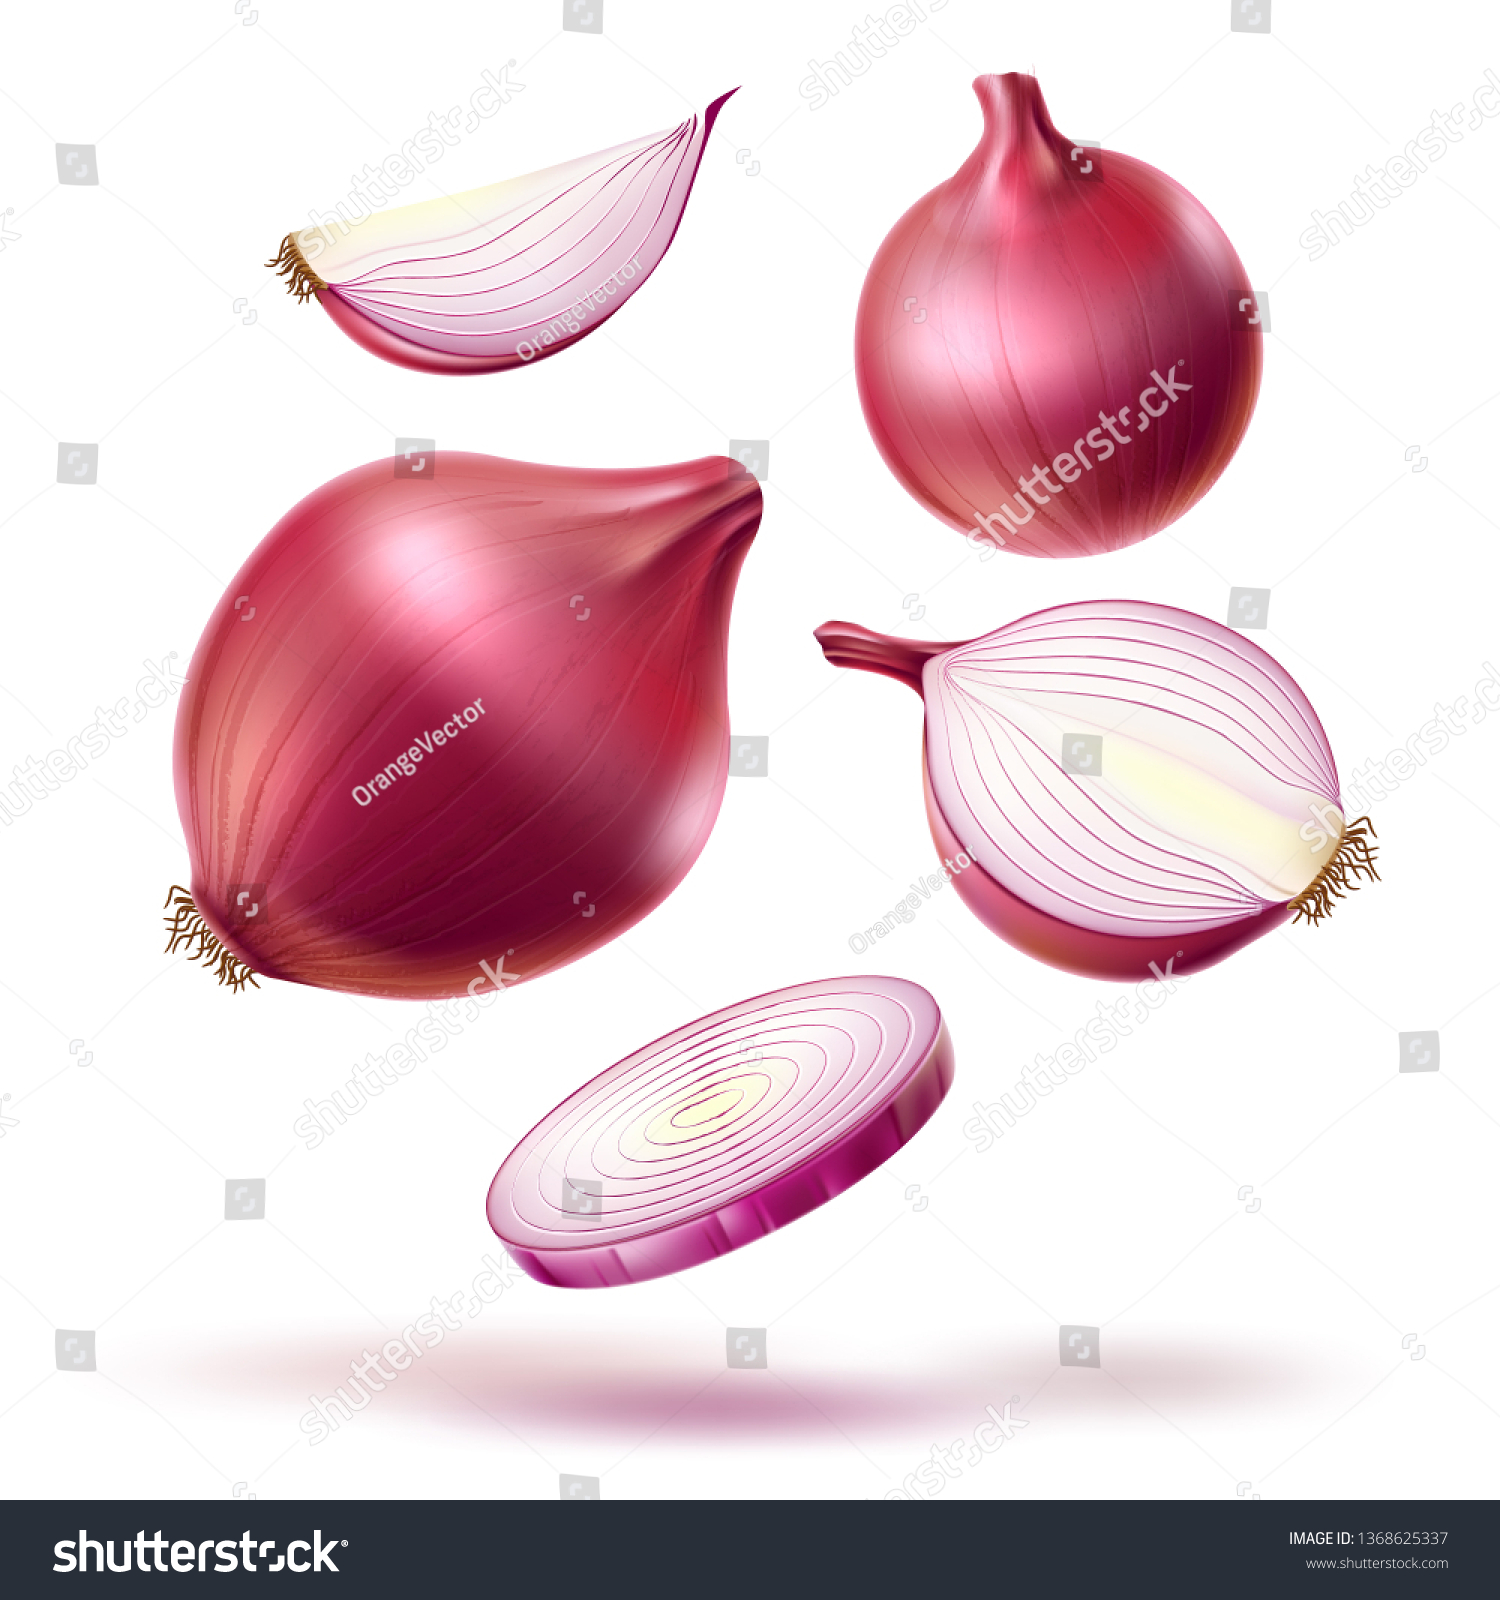 Realistic red onion whole bulb, slices mix. Fresh natural food for product package, menu design. Vector ripe sliced onion for healthy cooking. Natural and vegetarian dieting. #1368625337